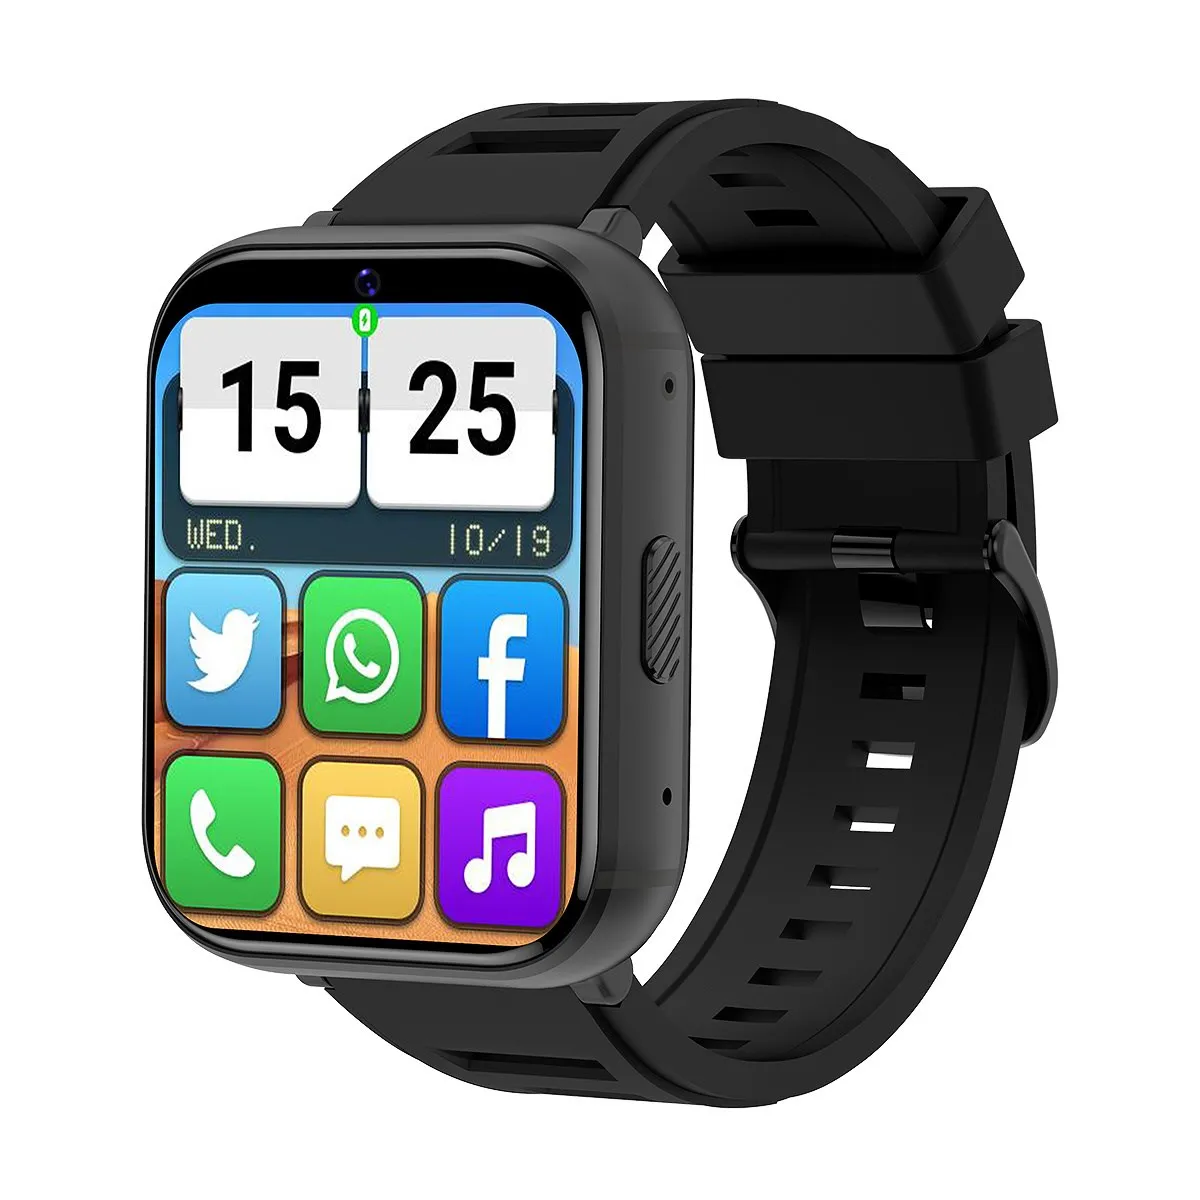 

Latest Smart Watch Q668 Large Screen Android 9.1 OS 4G Bluetooth-compatible Call Heart Rate Monitor WIFI Internet Bracelet Sale